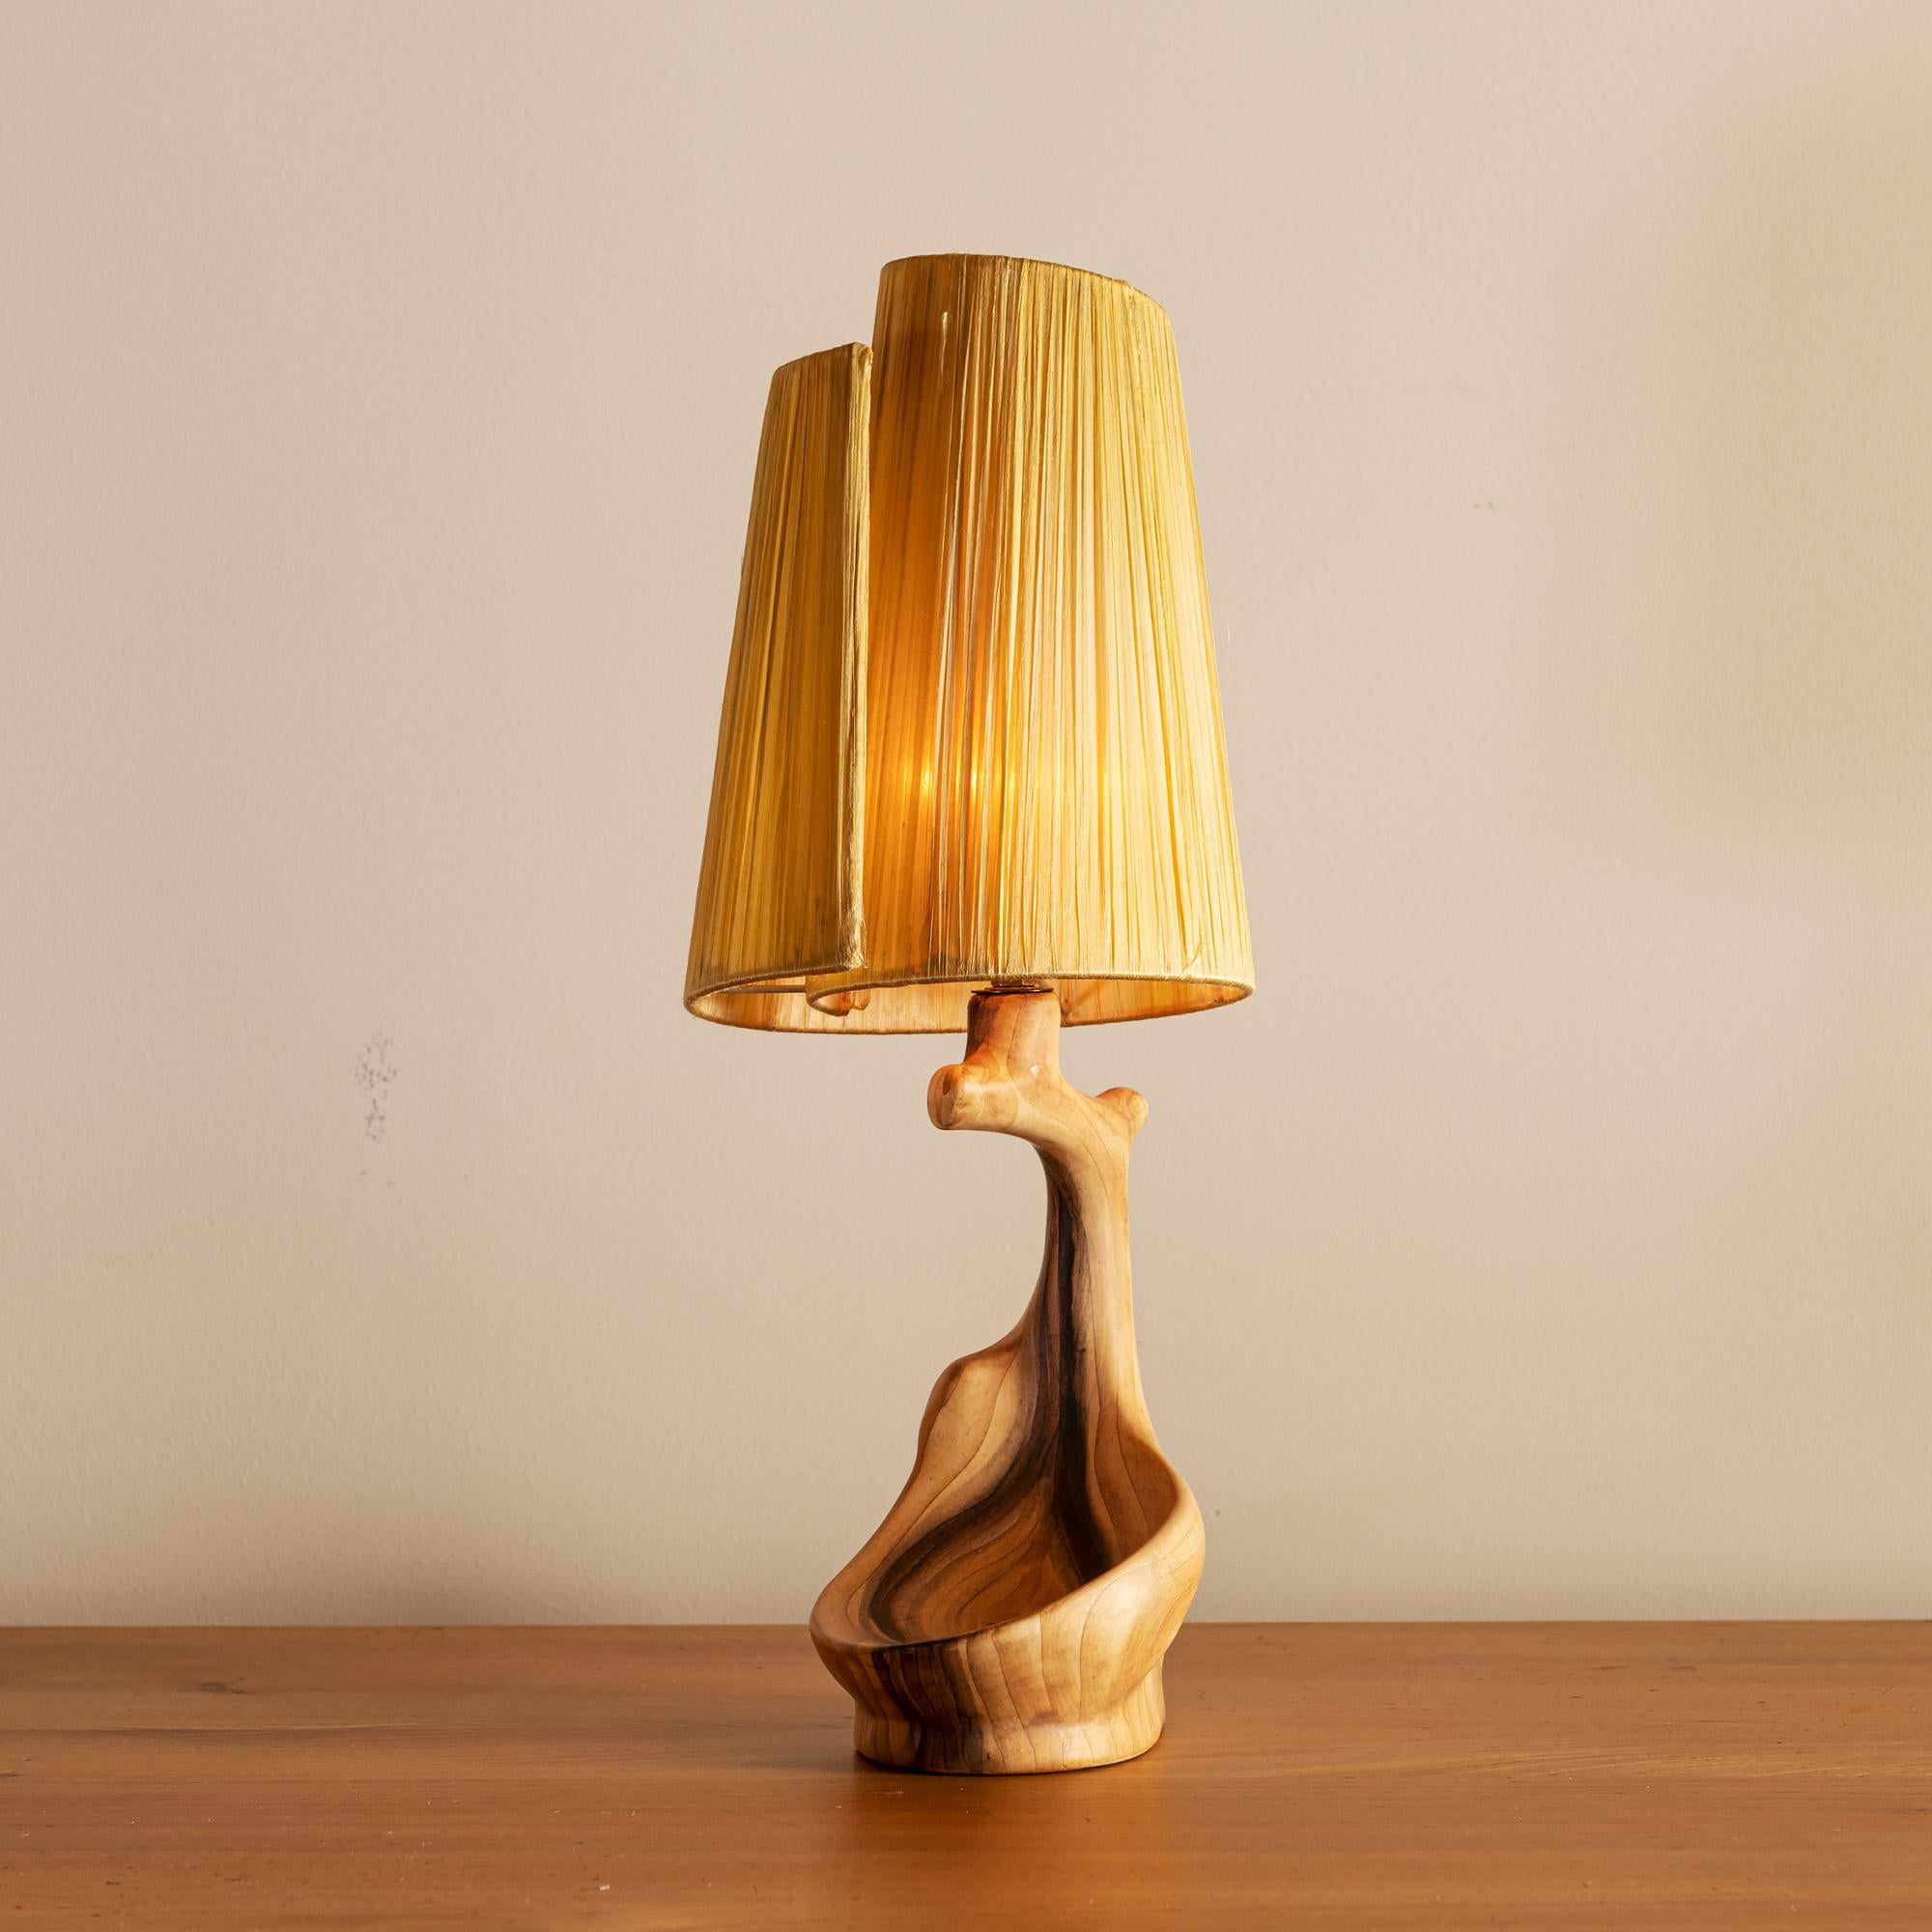 Organic and charming Vallauris table lamp in faux bois glaze with spiral shade, inscribed on underside, France, 1950s.